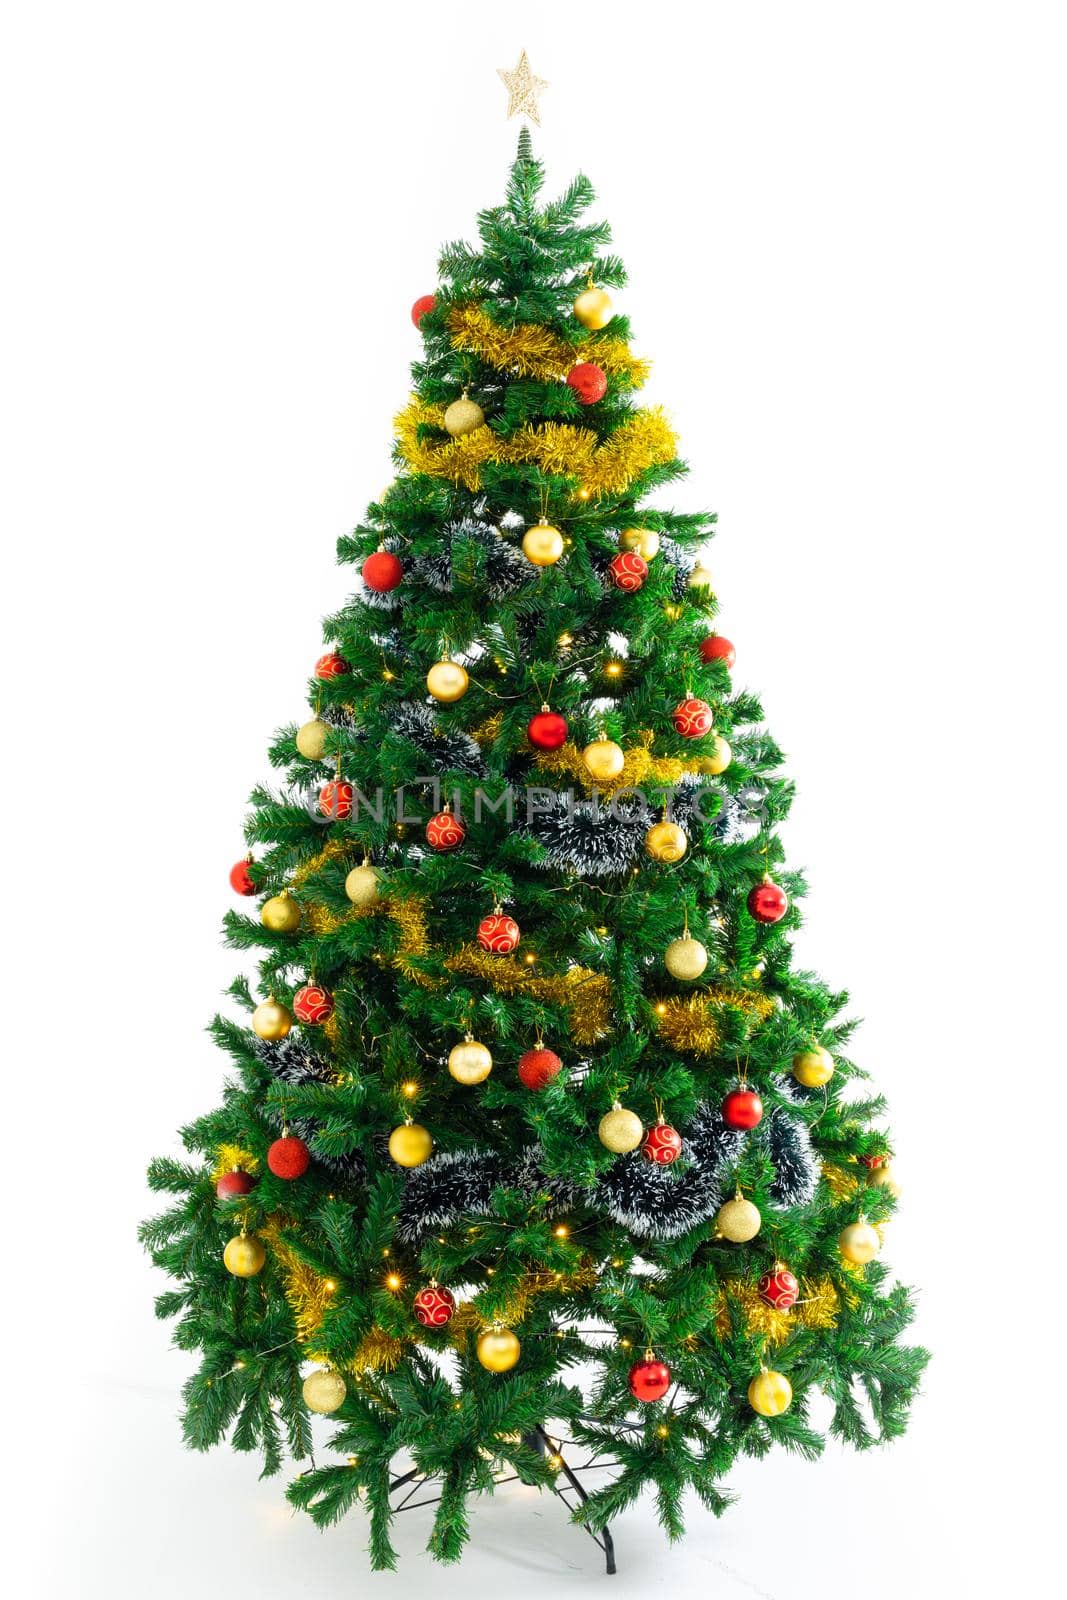 Composition of christmas tree with baubles and star decorations on white background by Wavebreakmedia